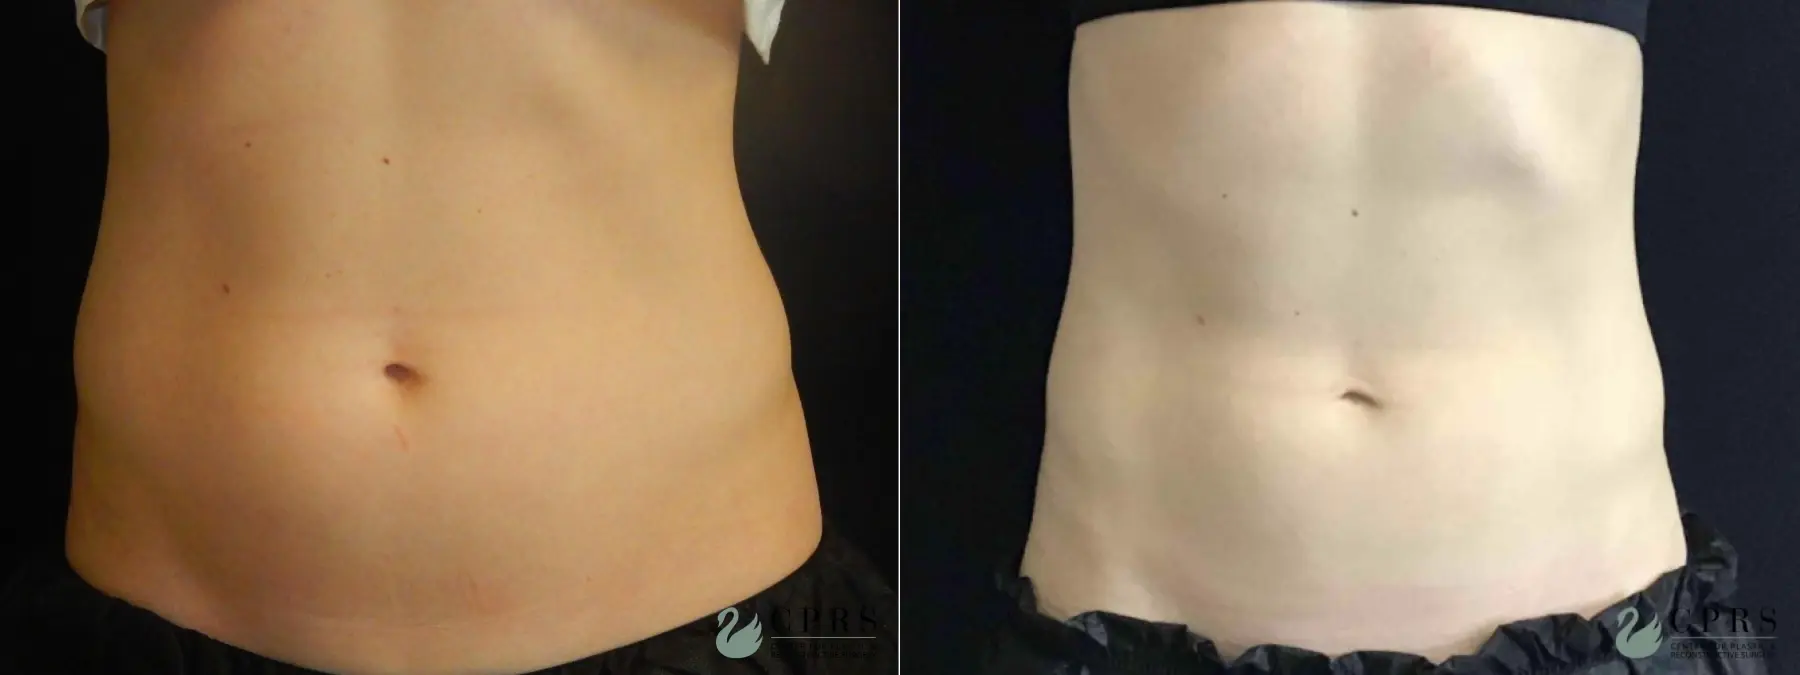 CoolSculpting®: Patient 5 - Before and After  